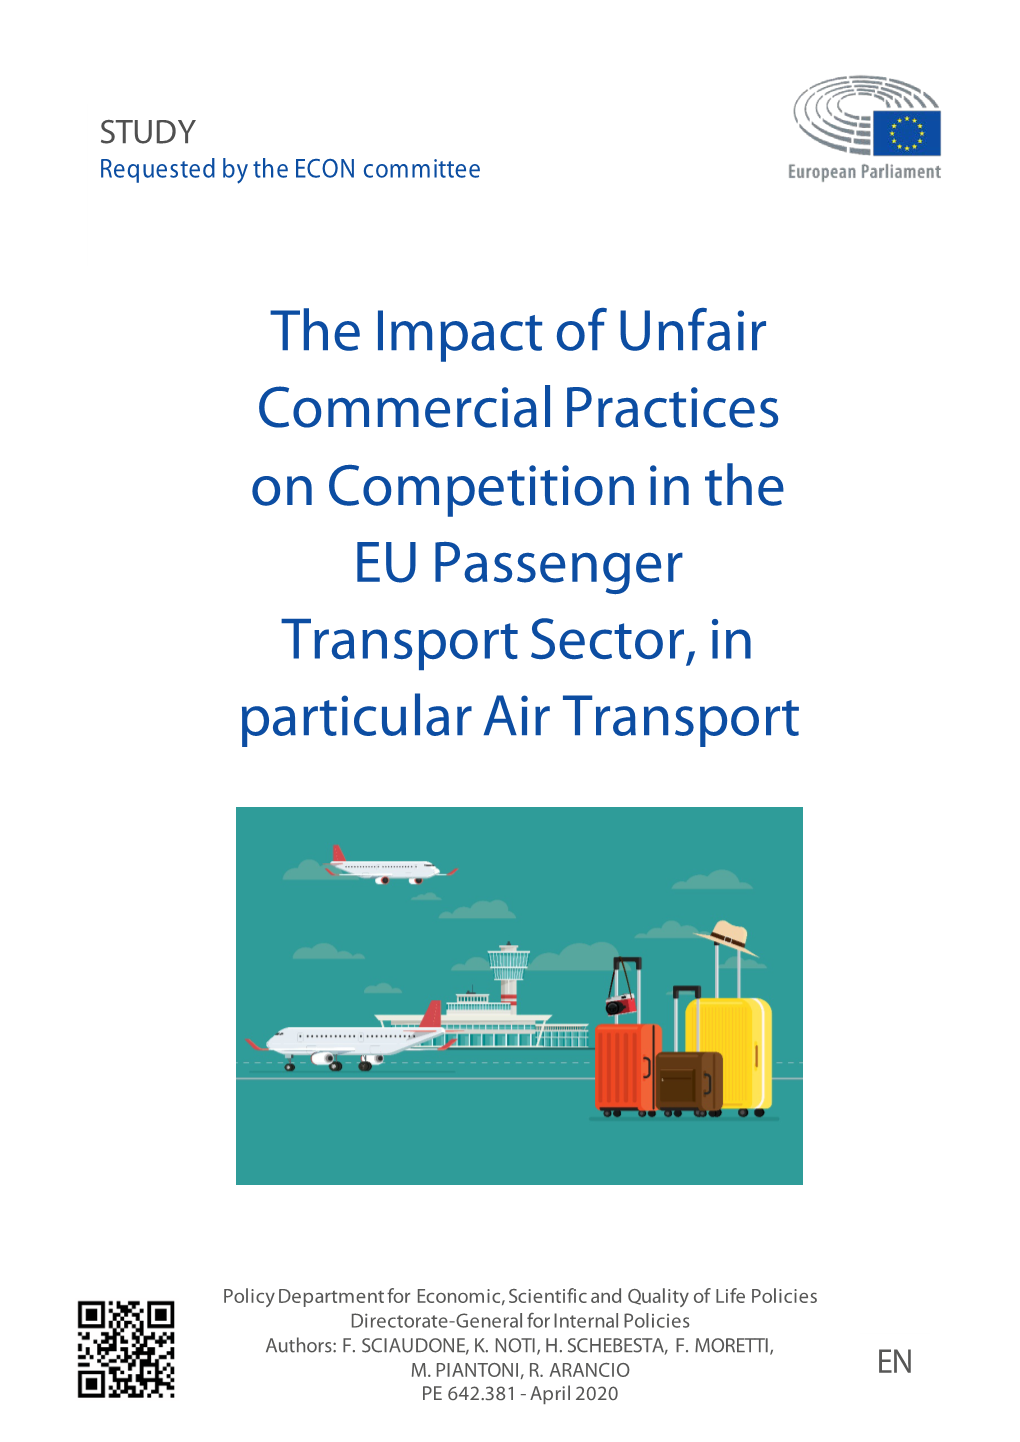 The Impact of Unfair Commercial Practices on Competition in the EU Passenger Transport Sector, in Particular Air Transport